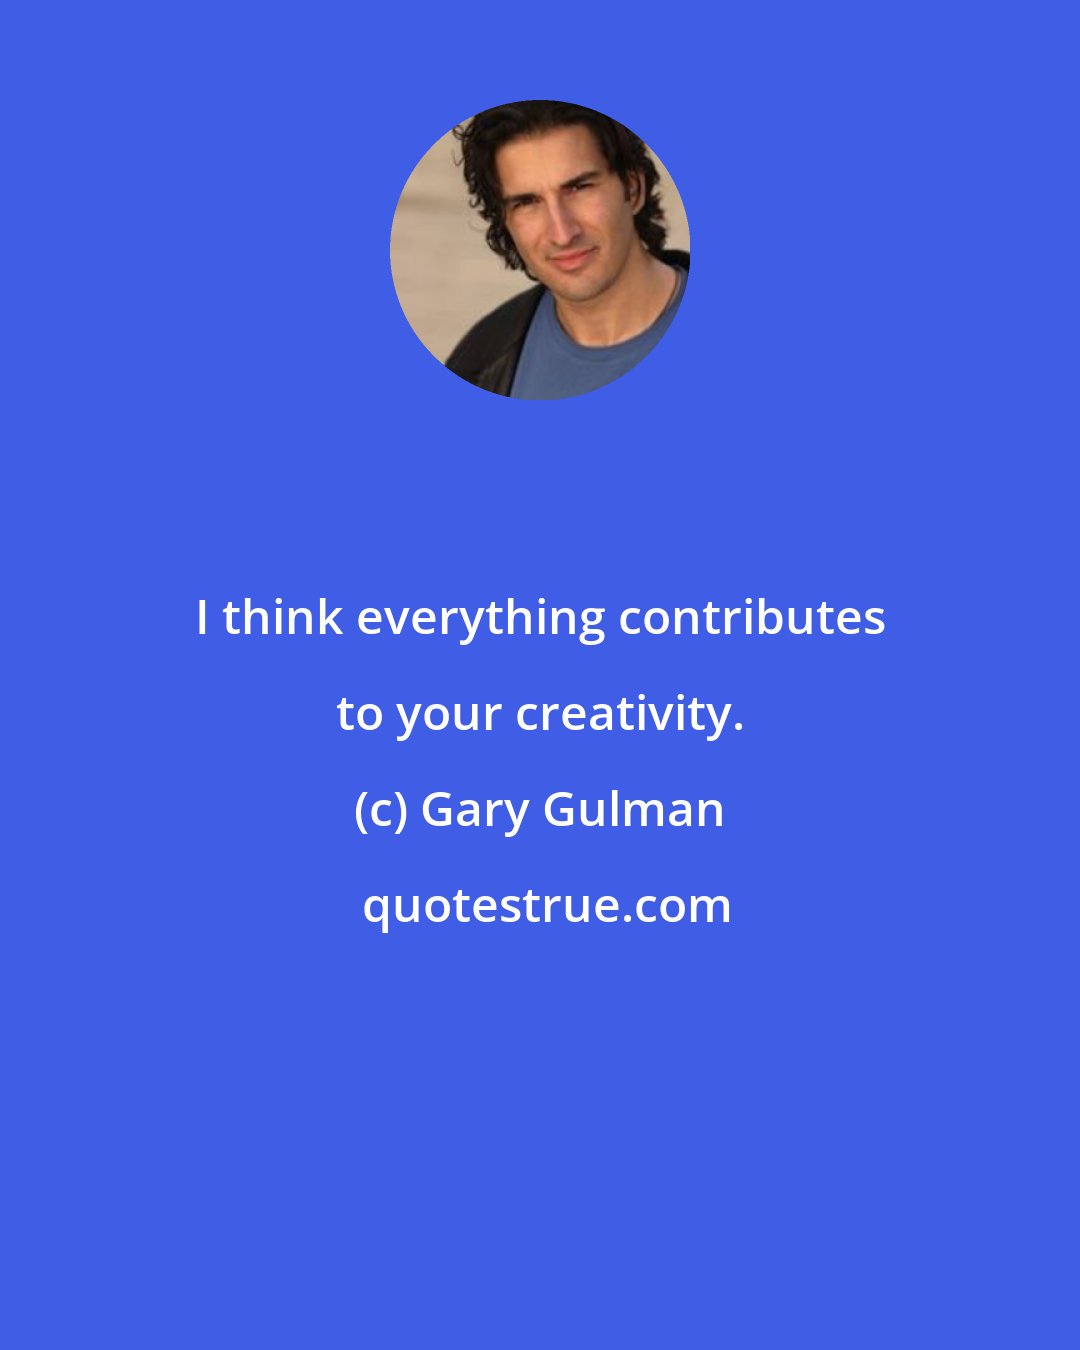 Gary Gulman: I think everything contributes to your creativity.